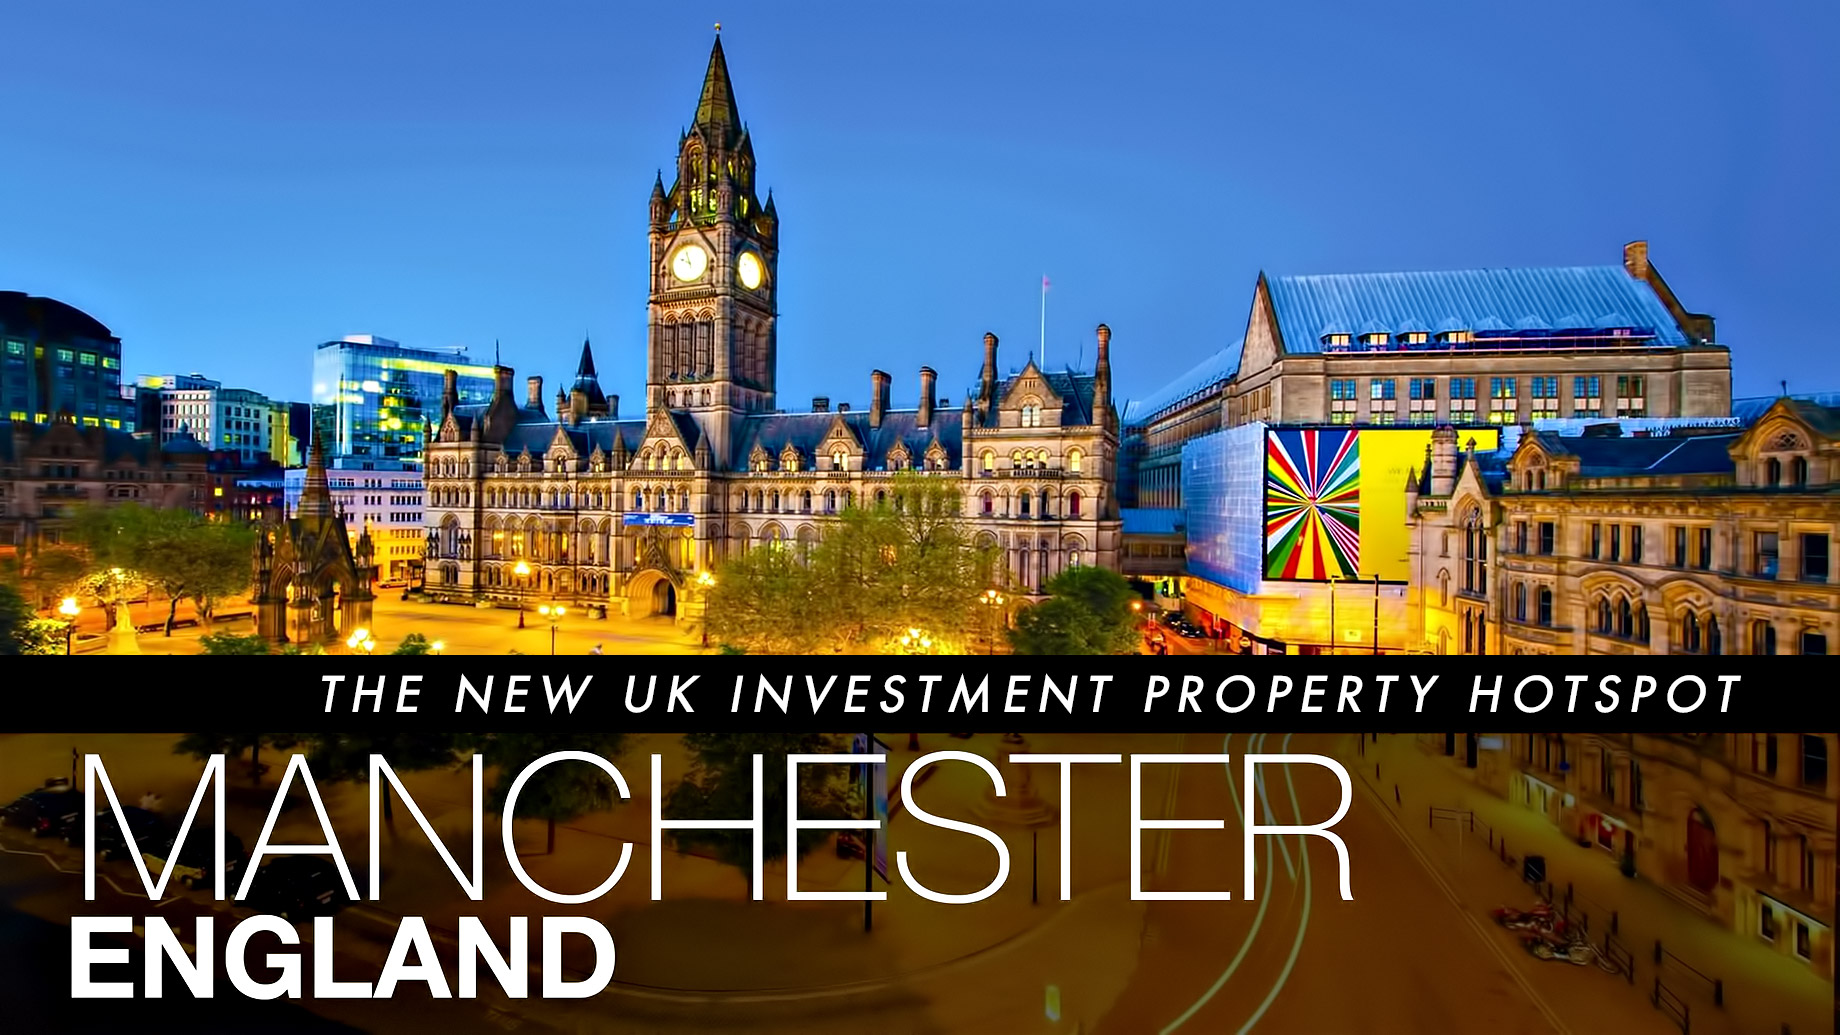 Manchester - The New UK Investment Property Hotspot in England